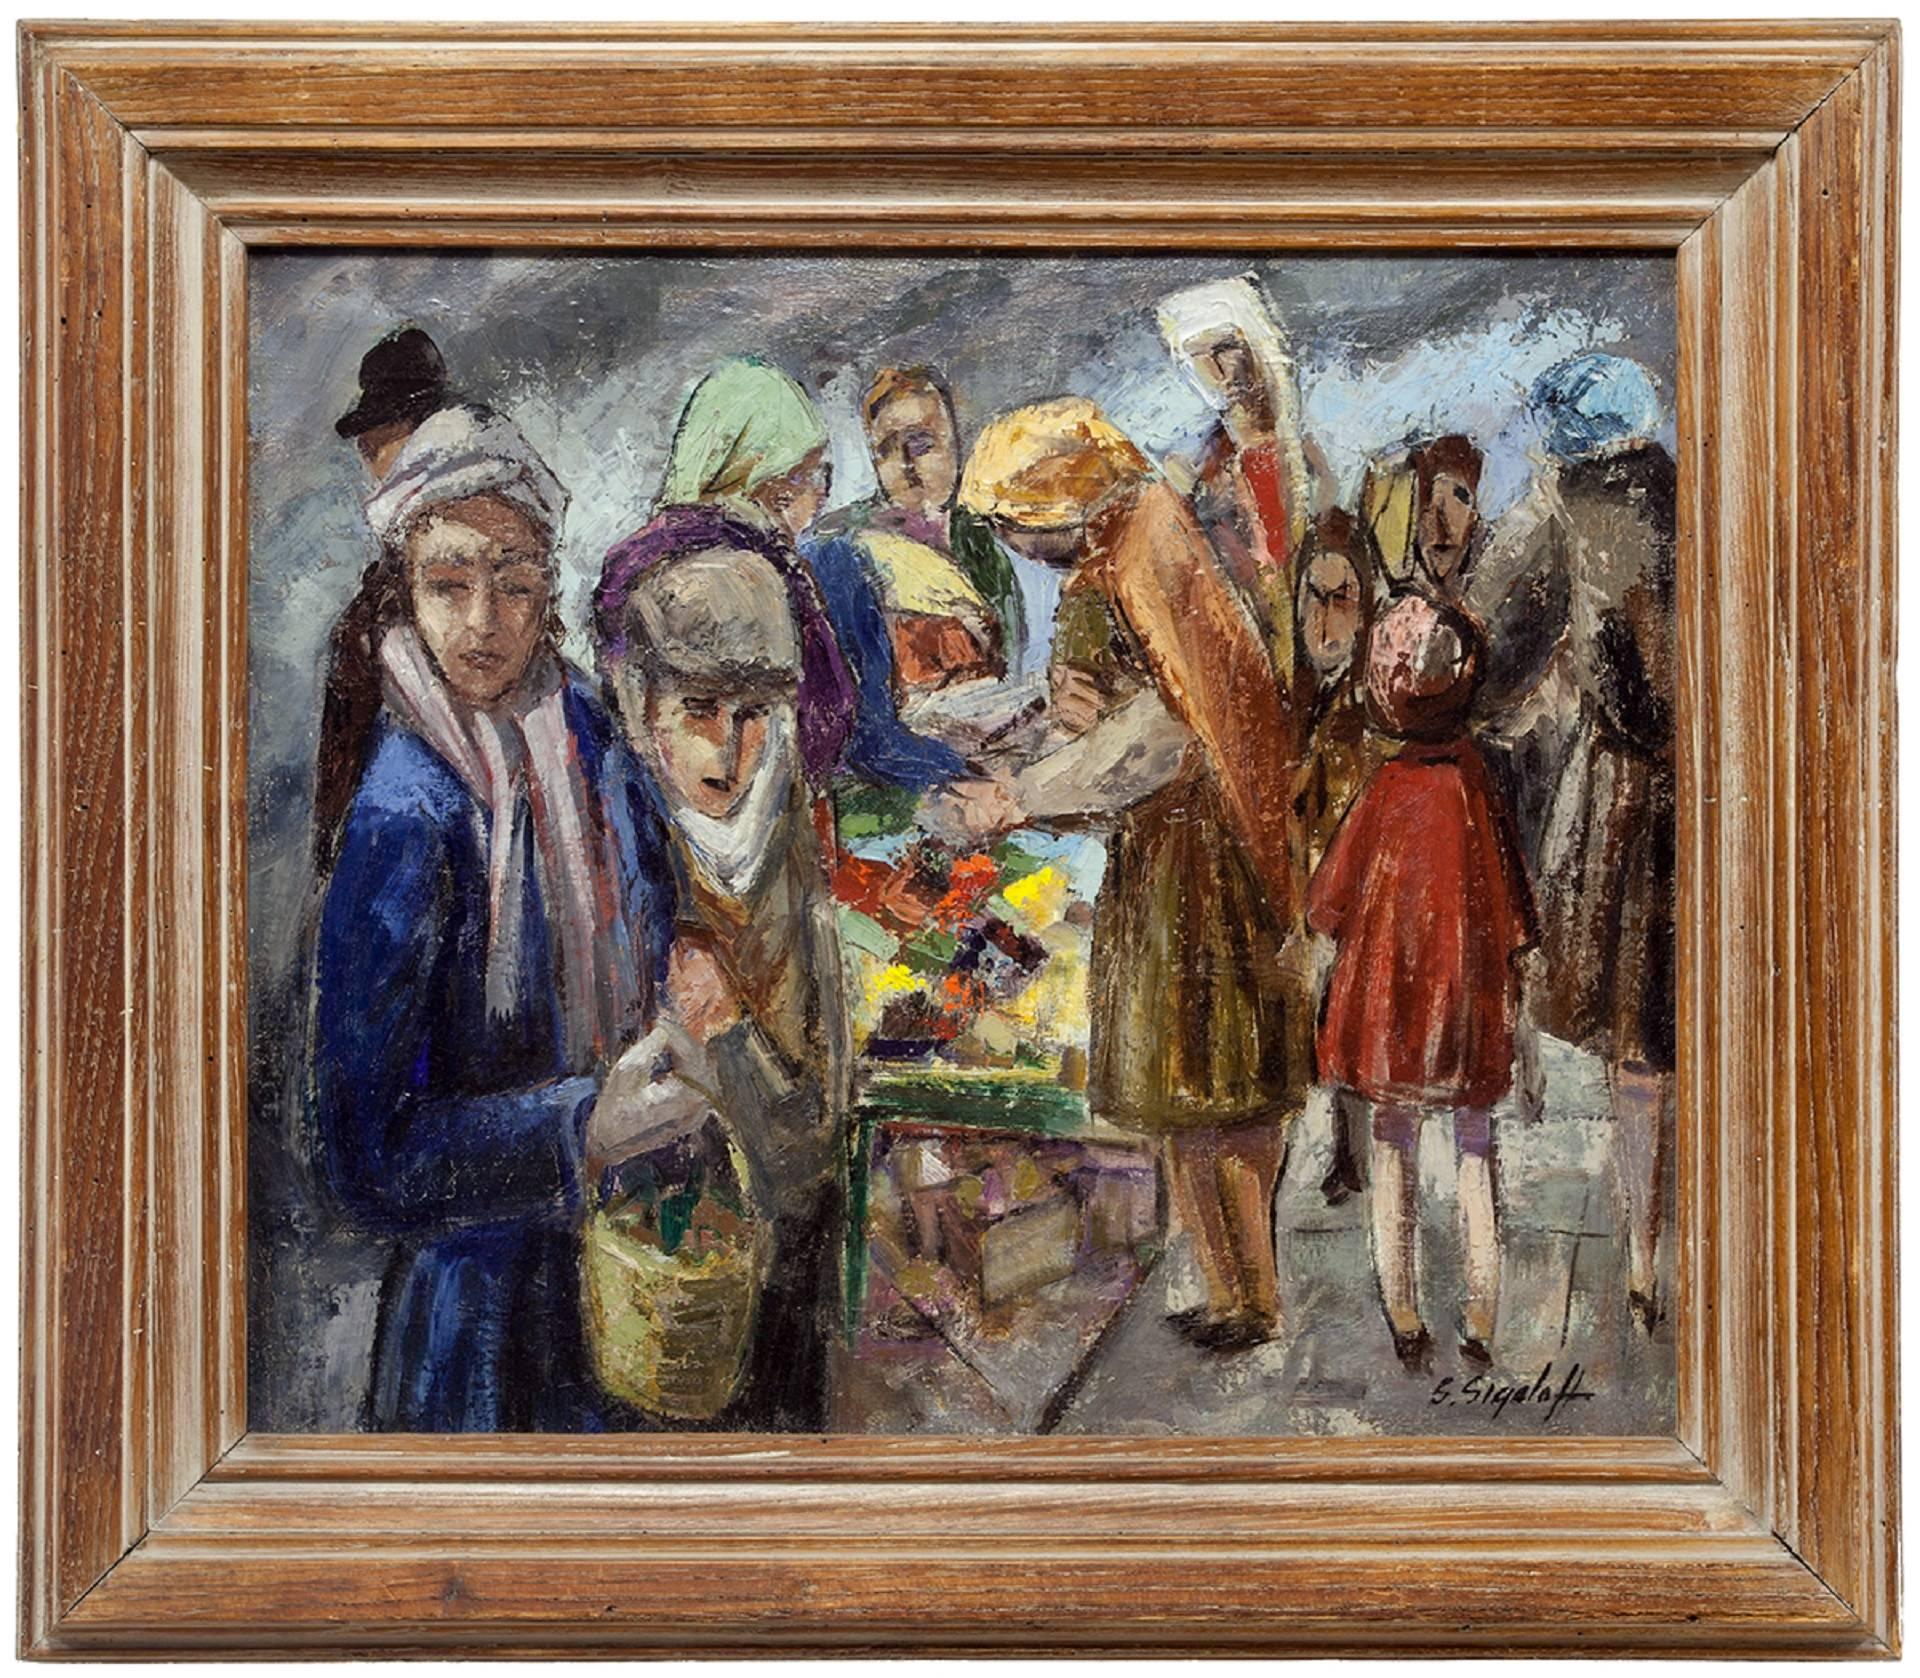 Samuel Sigaloff Figurative Painting - Jewish Peddlers on Market Day Modernist Judaica OIl Painting Cubist Abstraction